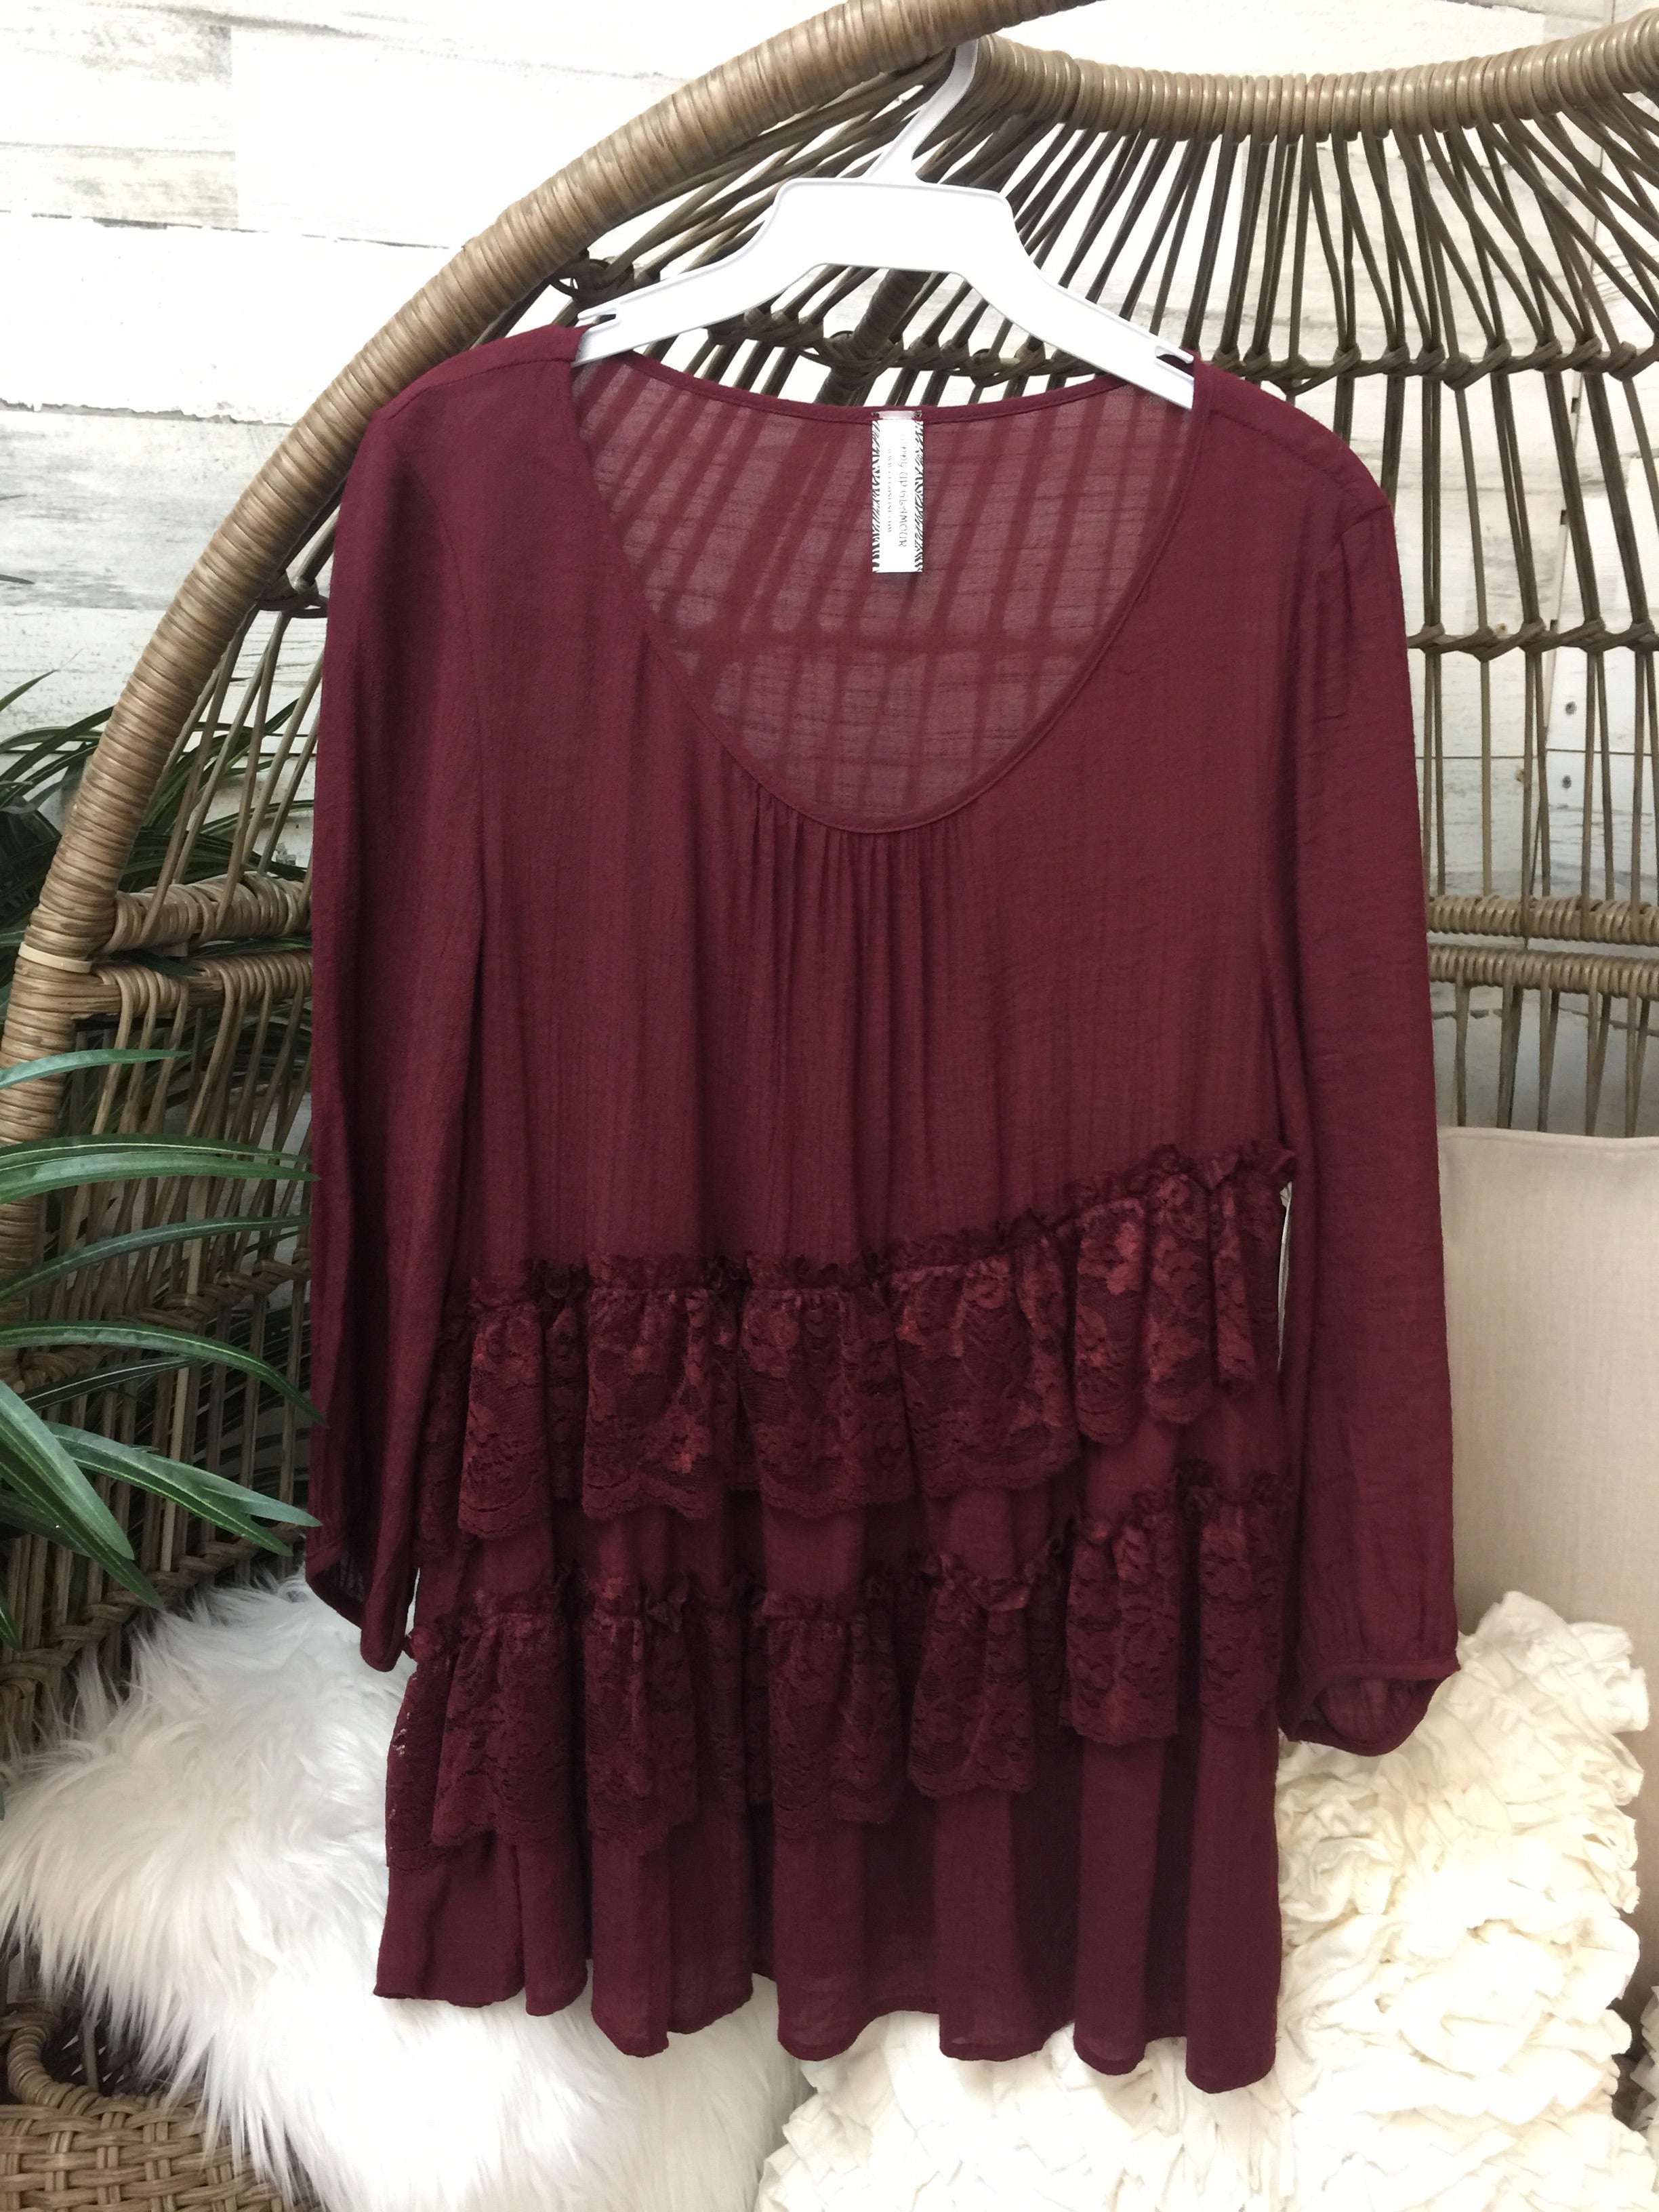 Tiered Baby Doll Top with Lace in Maroon - Giddy Up Glamour Boutique